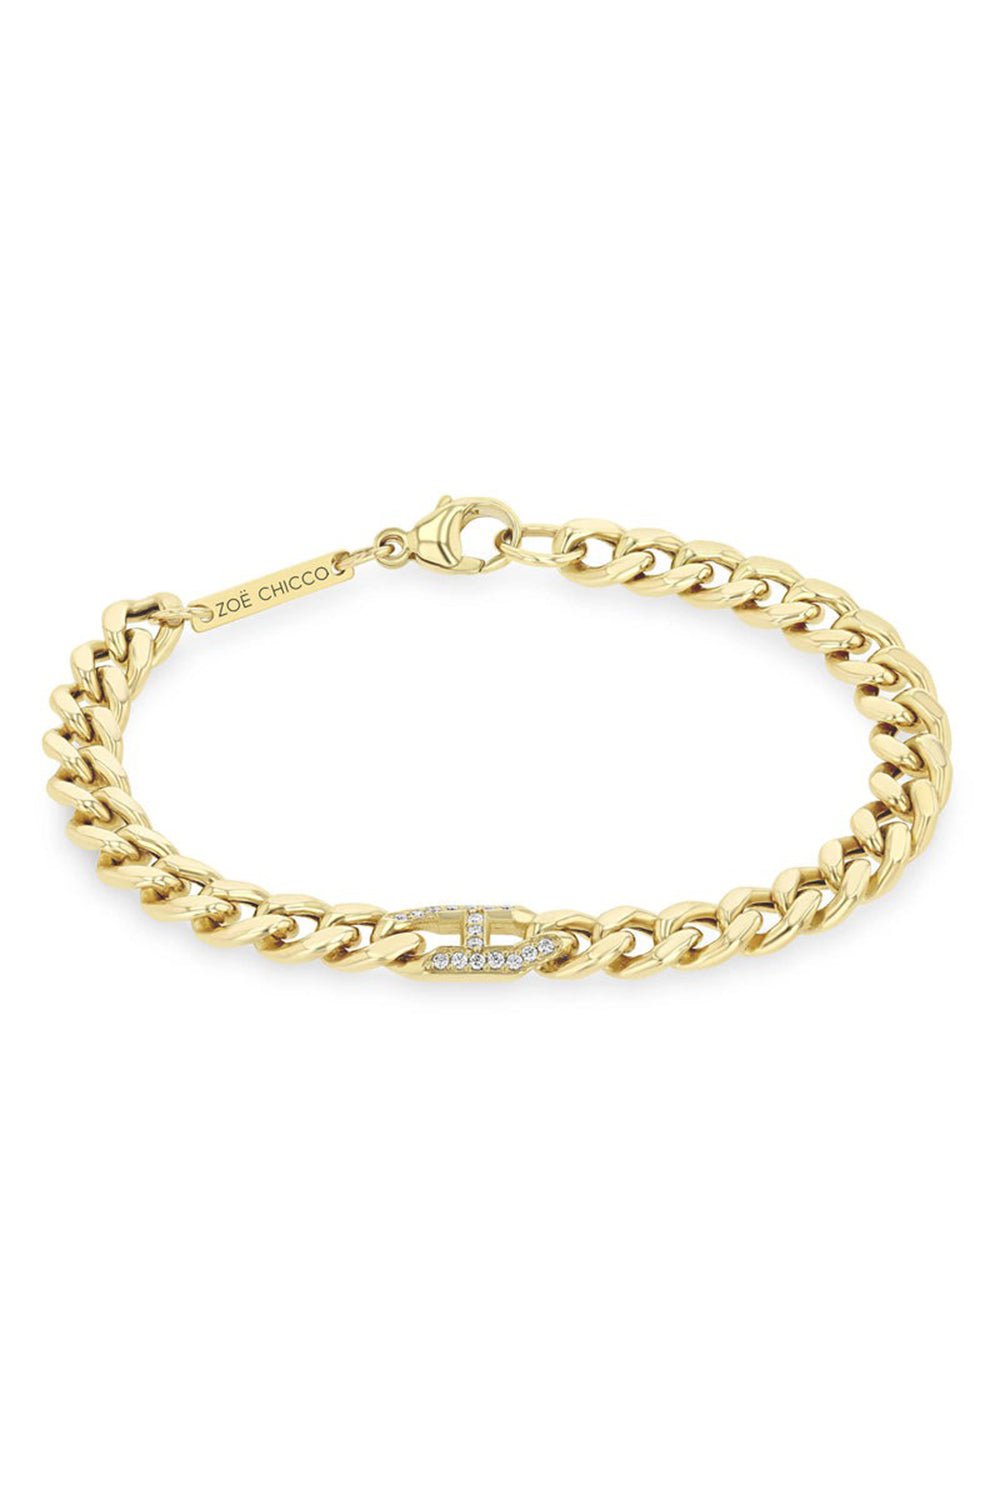 ZOE CHICCO-Mariner Link Large Curb Chain Bracelet-YELLOW GOLD